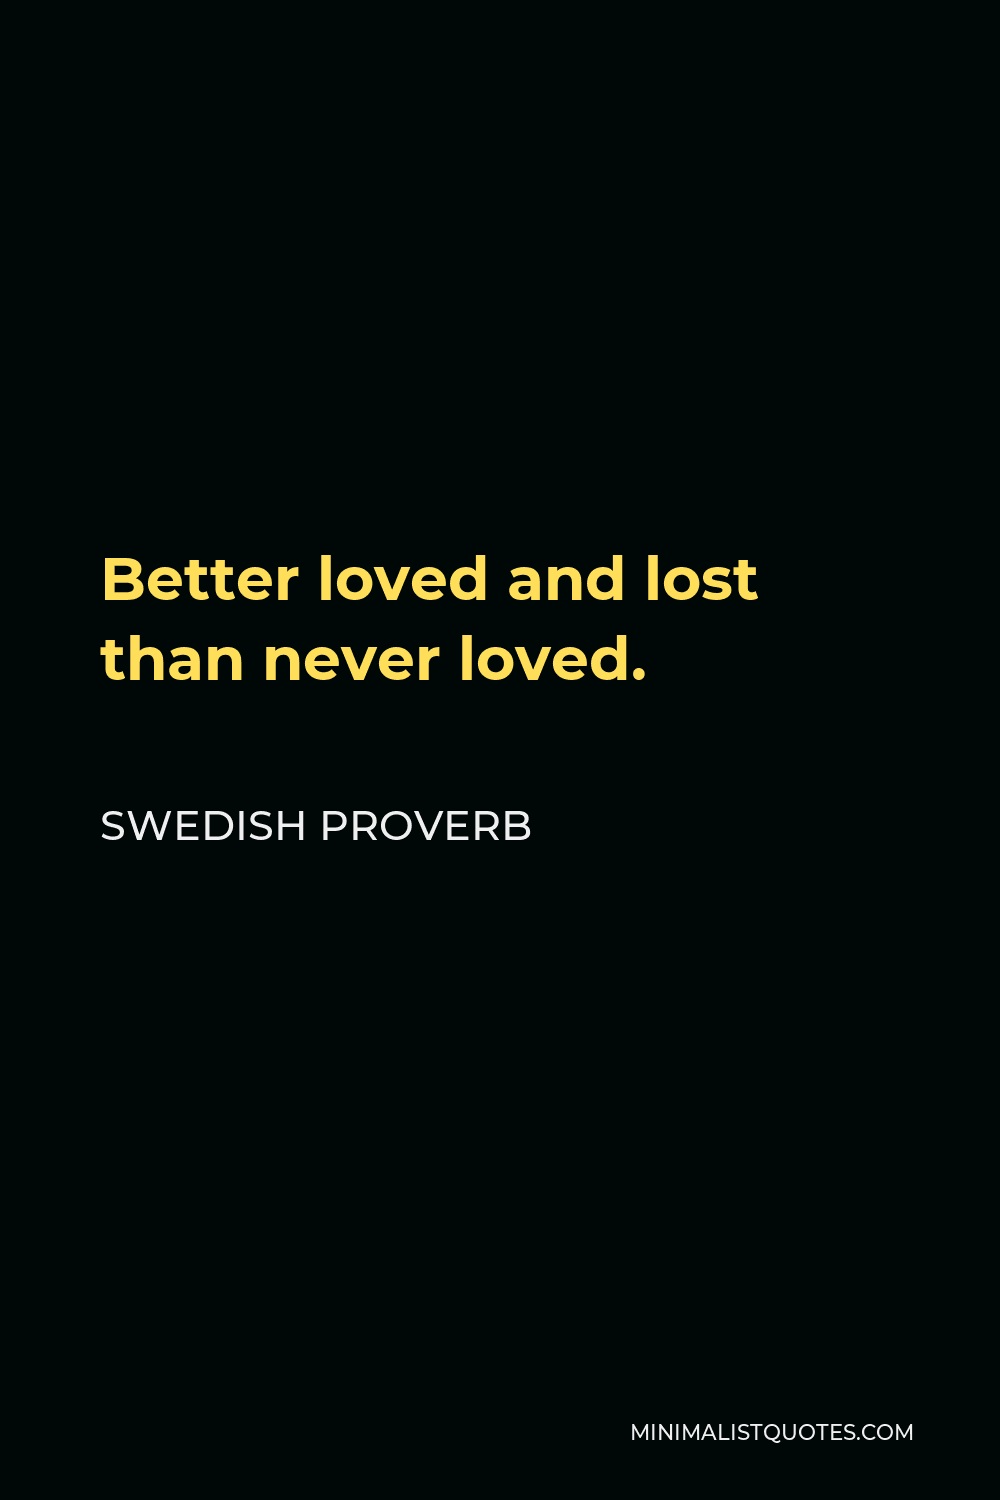 Swedish Proverb Quote - Better loved and lost than never loved.